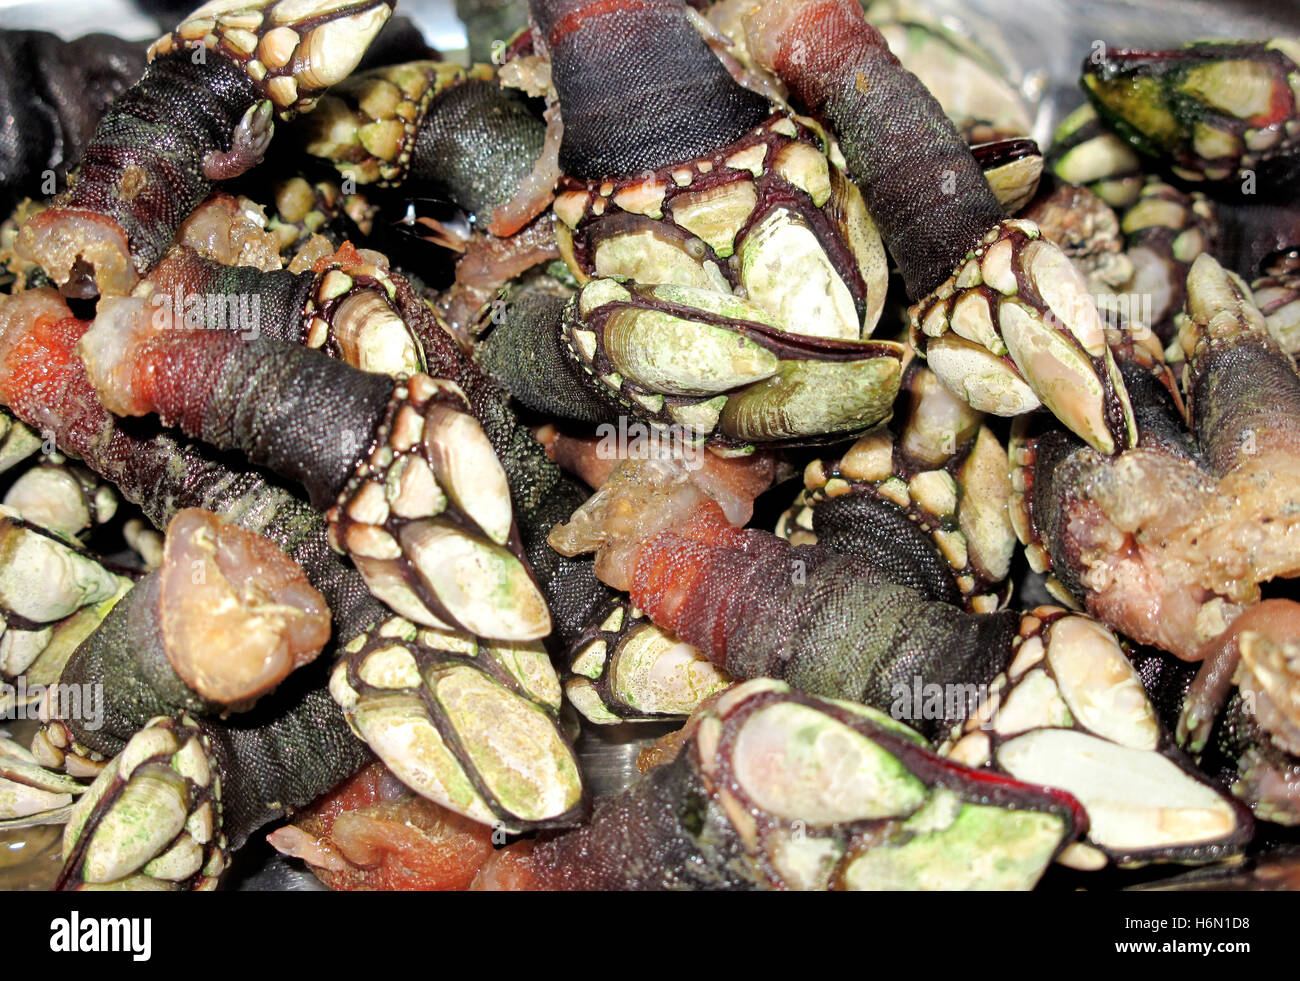 Juicy Galician barnacles cooked ready to eat Stock Photo